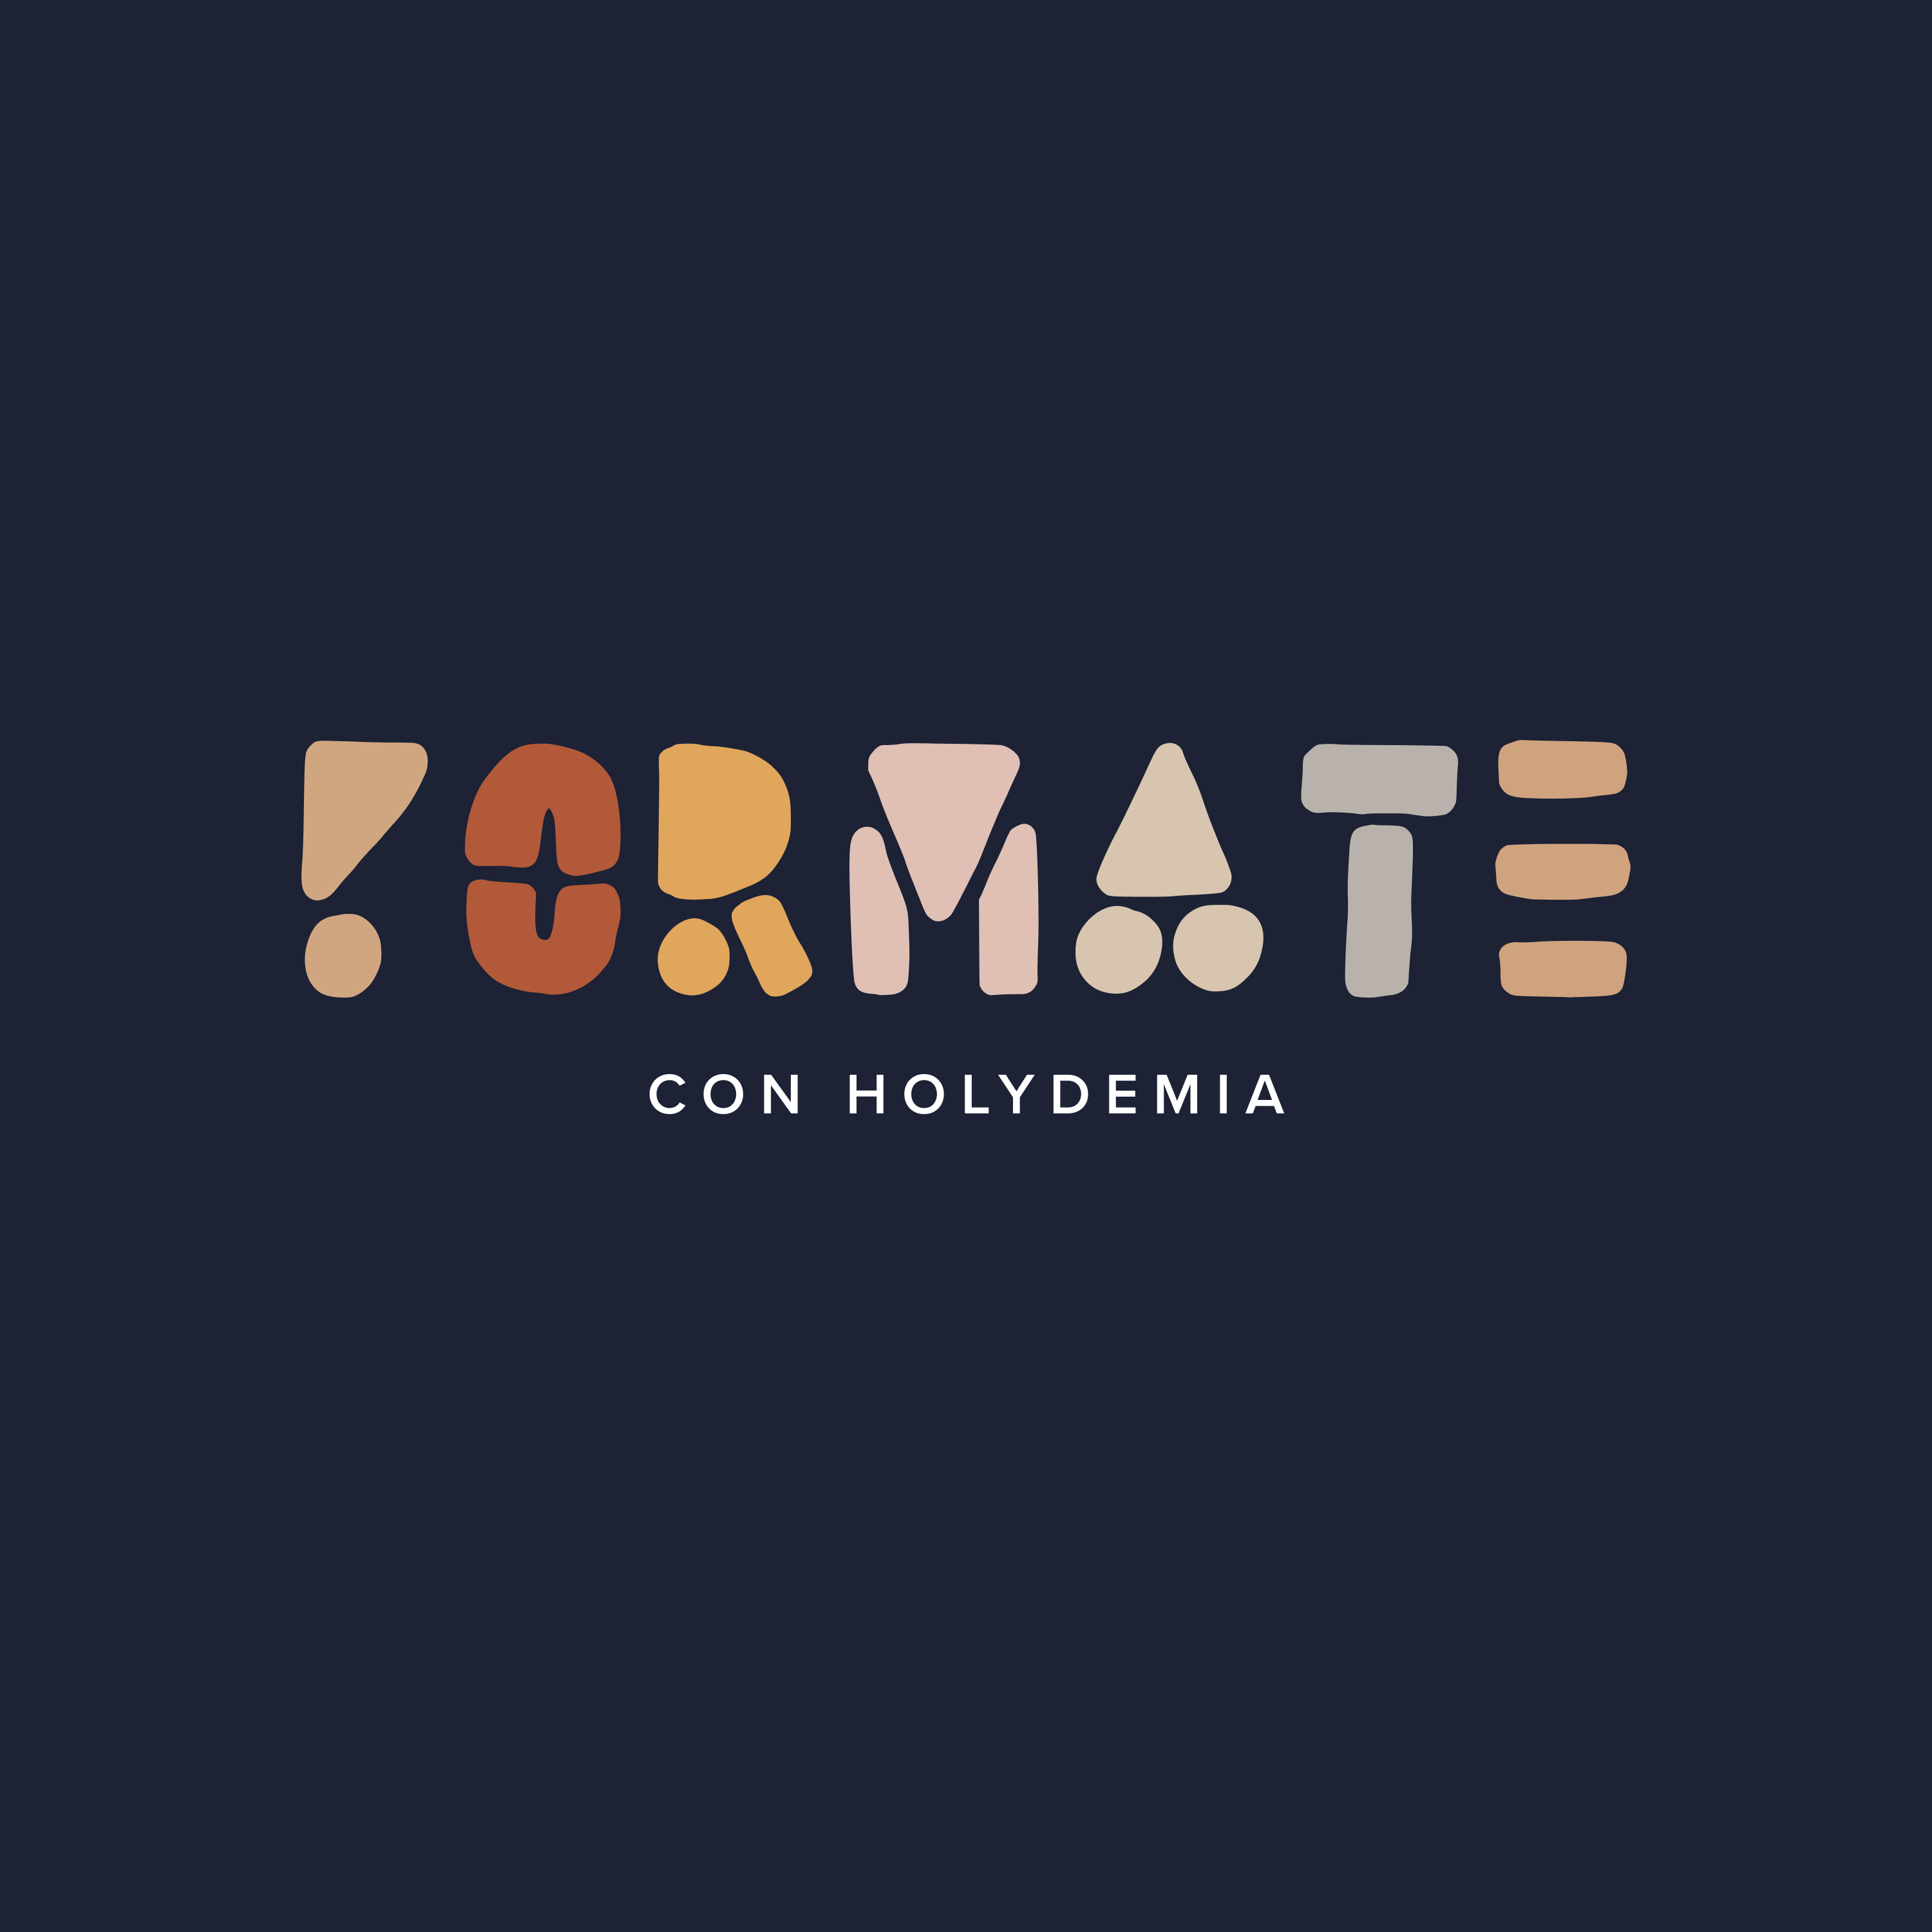 Artwork for podcast Fórmate con Holydemia